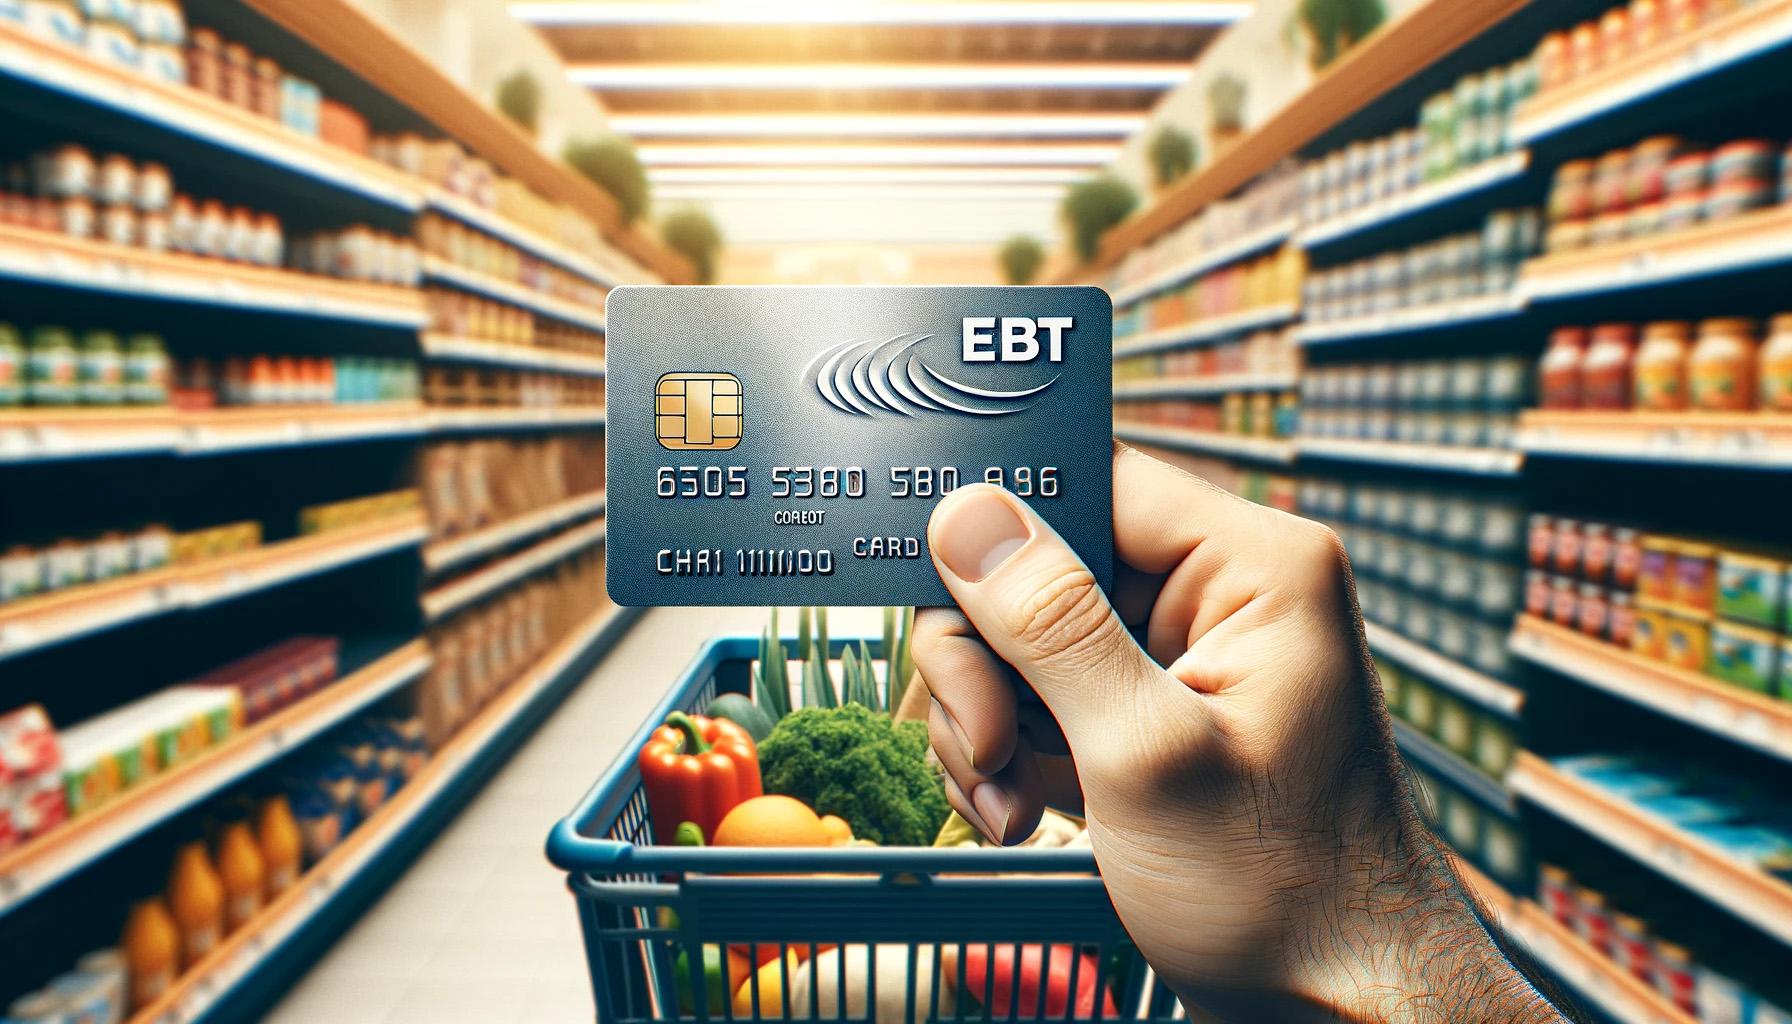 EBT or Electronic Benefit Transfer (EBT) card news graphic